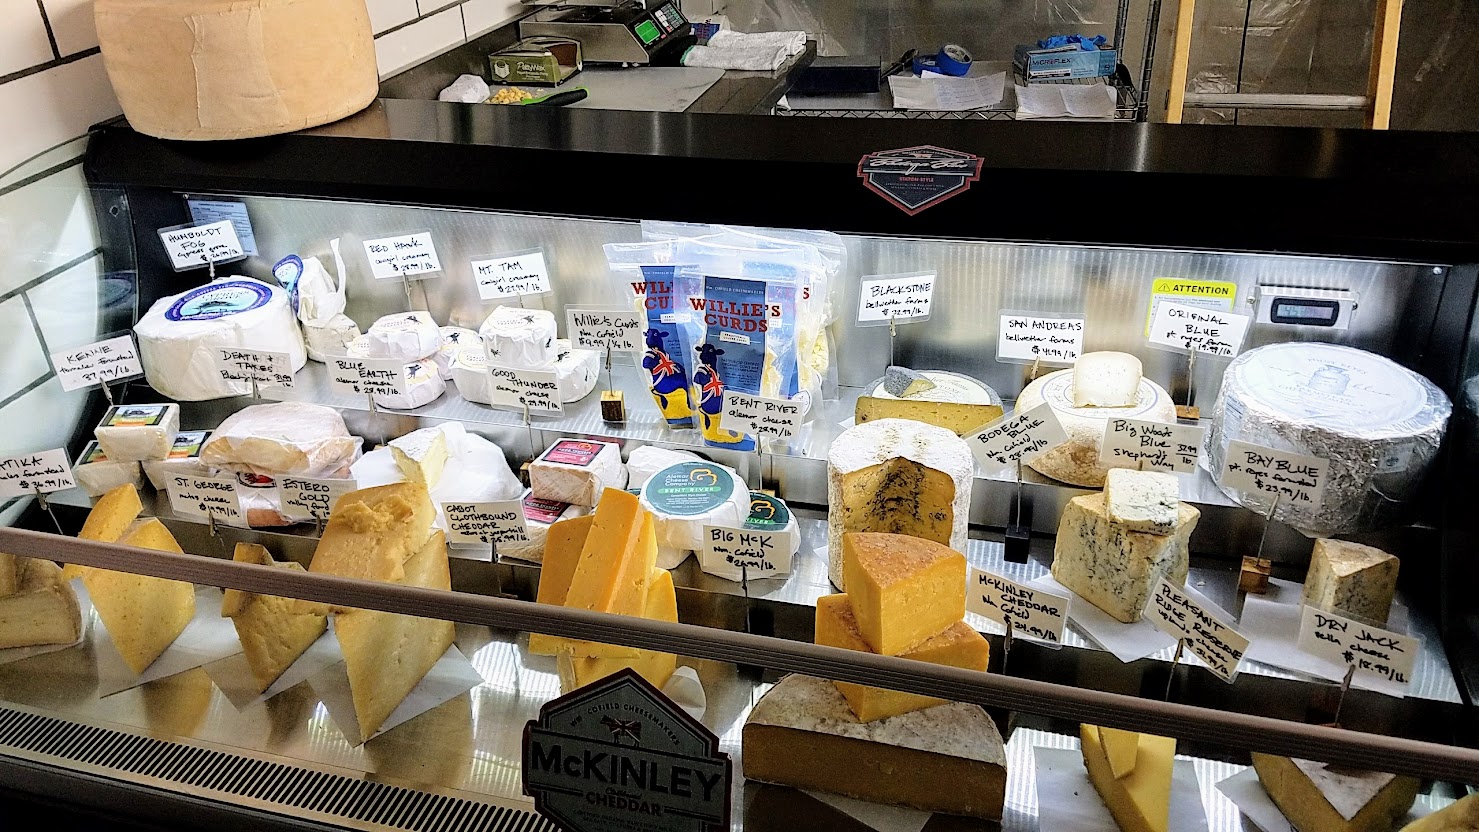 Wm. Cofield Cheesemakers, part of the Artisan Cheese Festival tour visiting the Barlow in Sebastopol downtown in the North Bay area, California